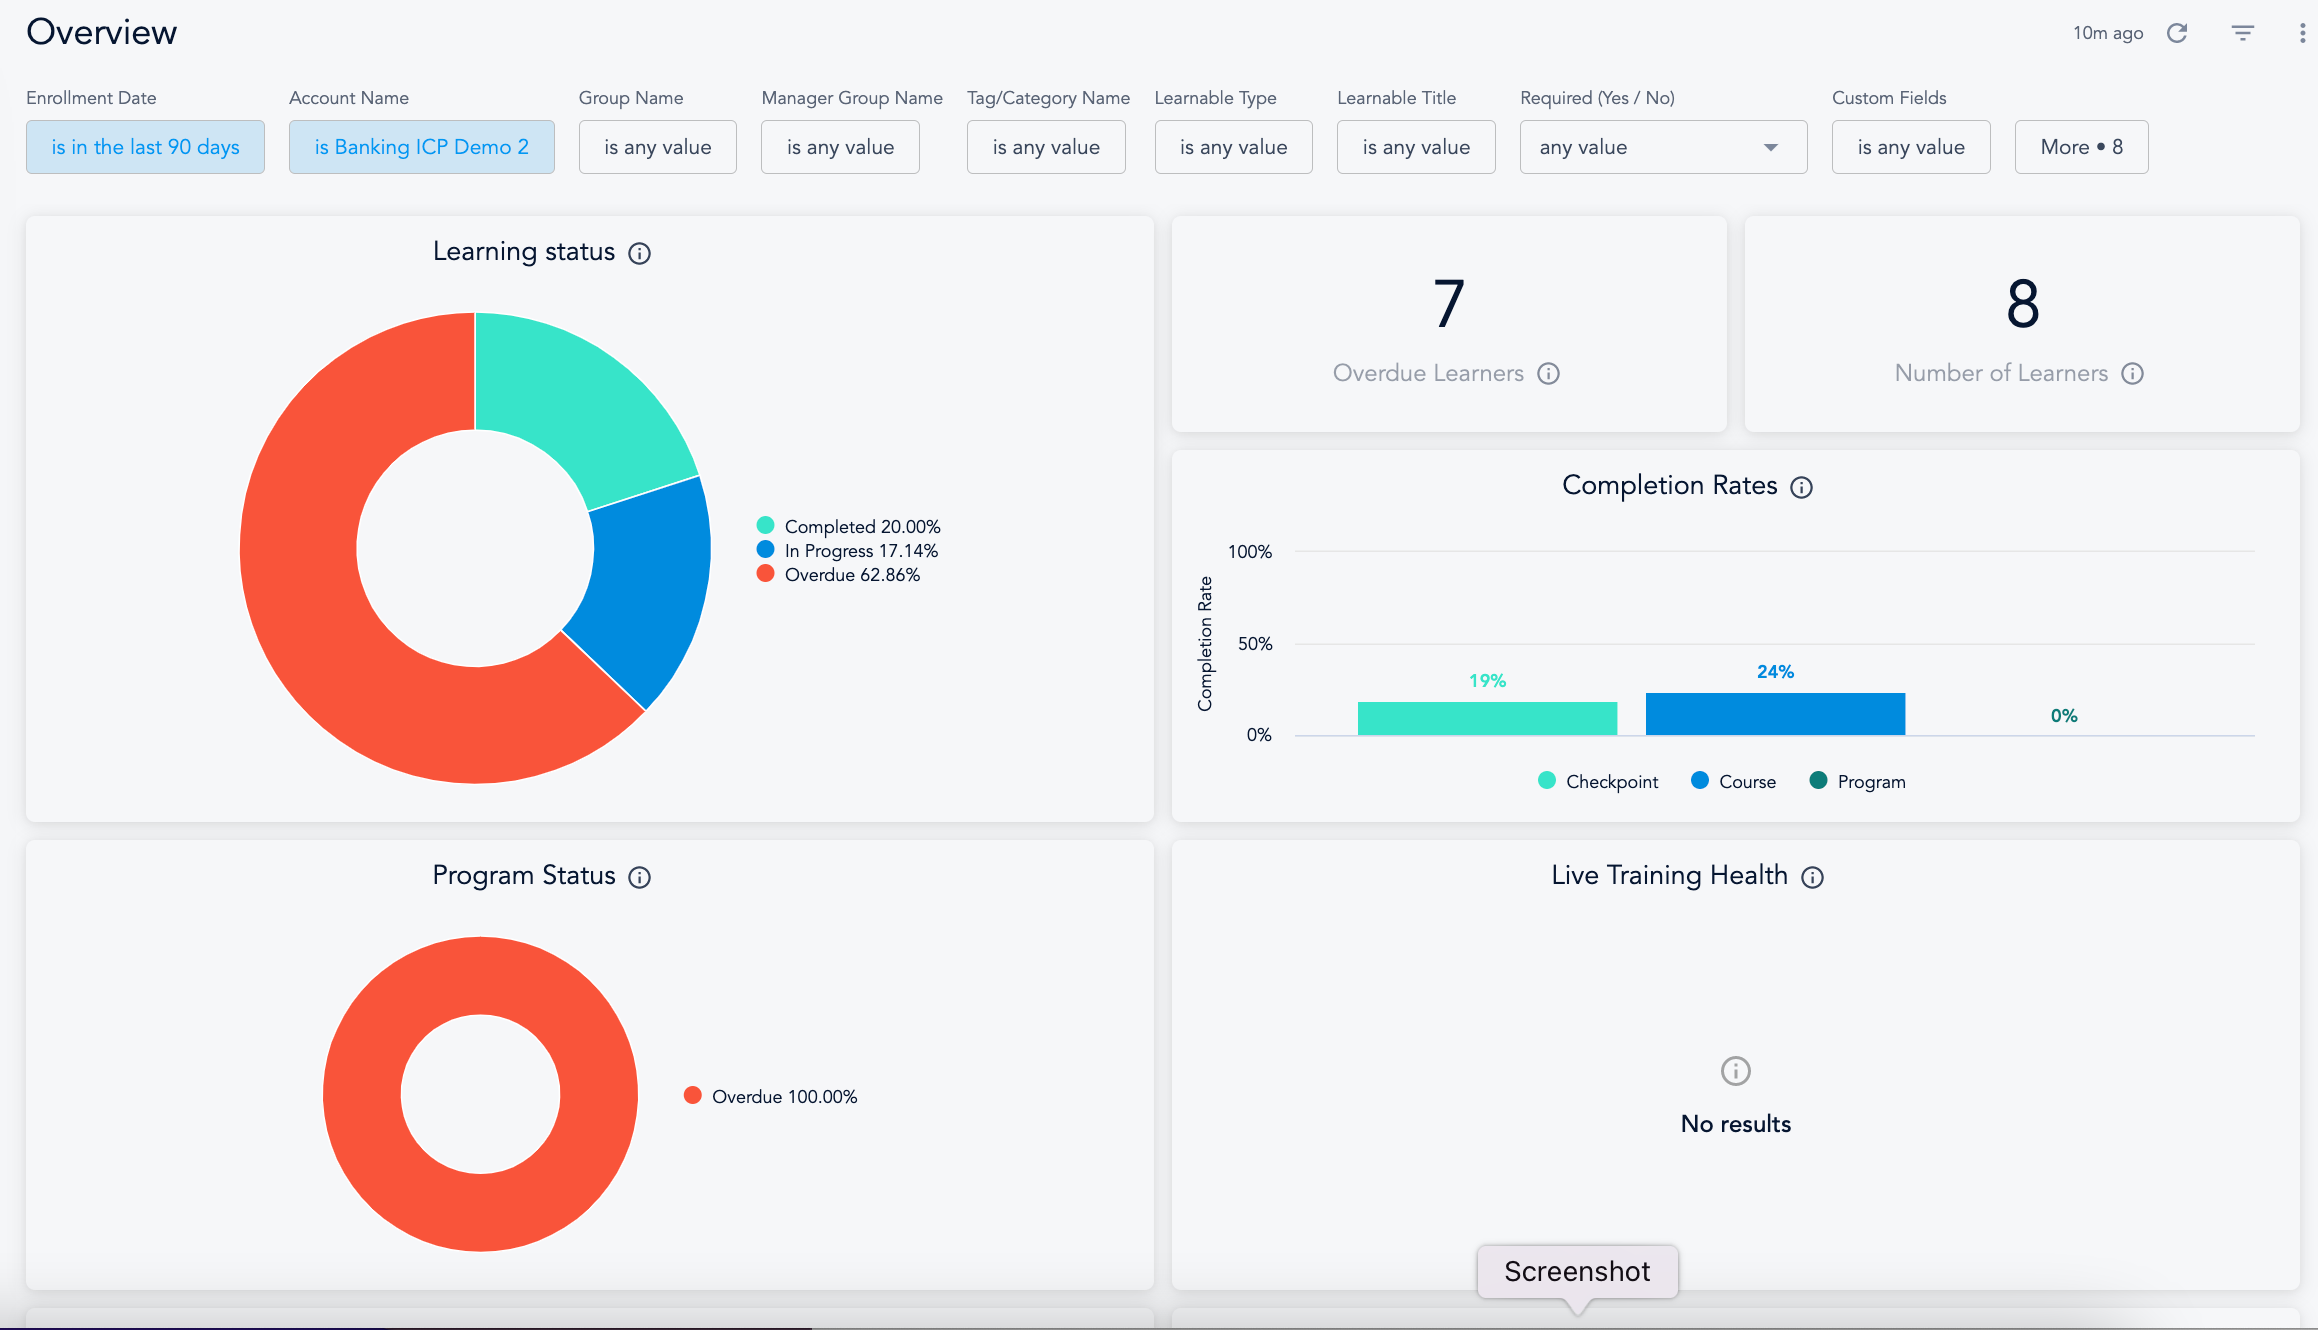 BRIDGE Software - Bridge Analytics Overview: From custom reports, scheduled data delivery, to simply downloading the dashboard as a PDF, understanding your data is quick, easy and intuitive